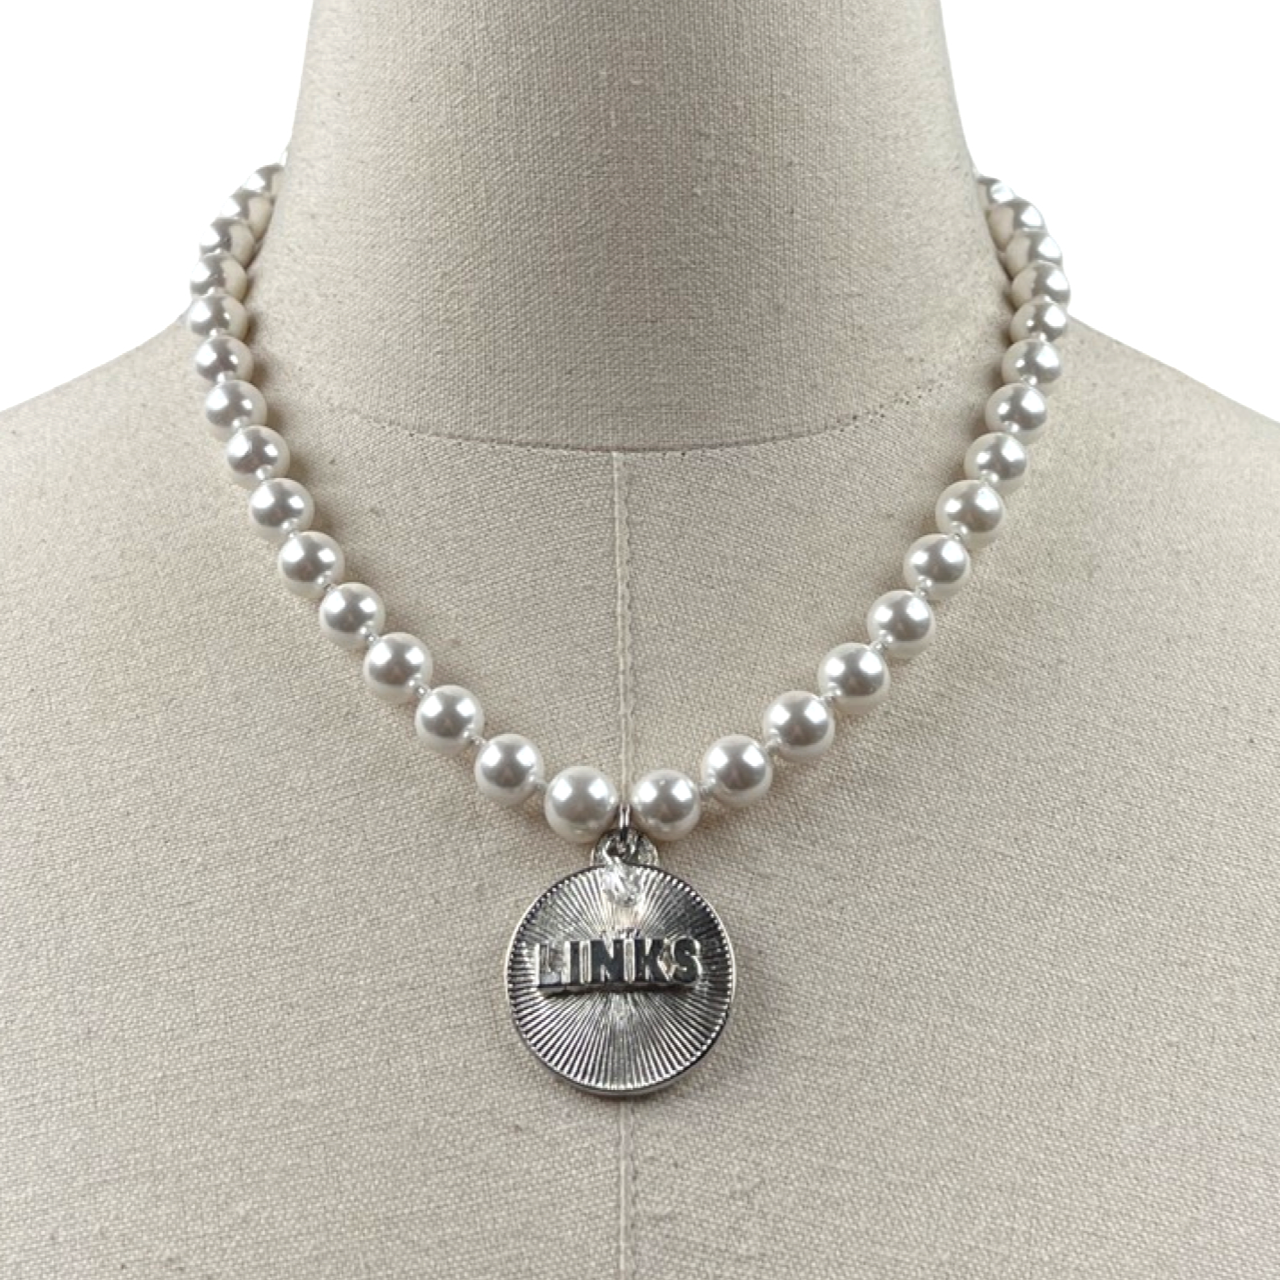 Links Classic Pearl 10 Necklace LINKS Necklaces Cerese D Jewelry Silver Radiant 